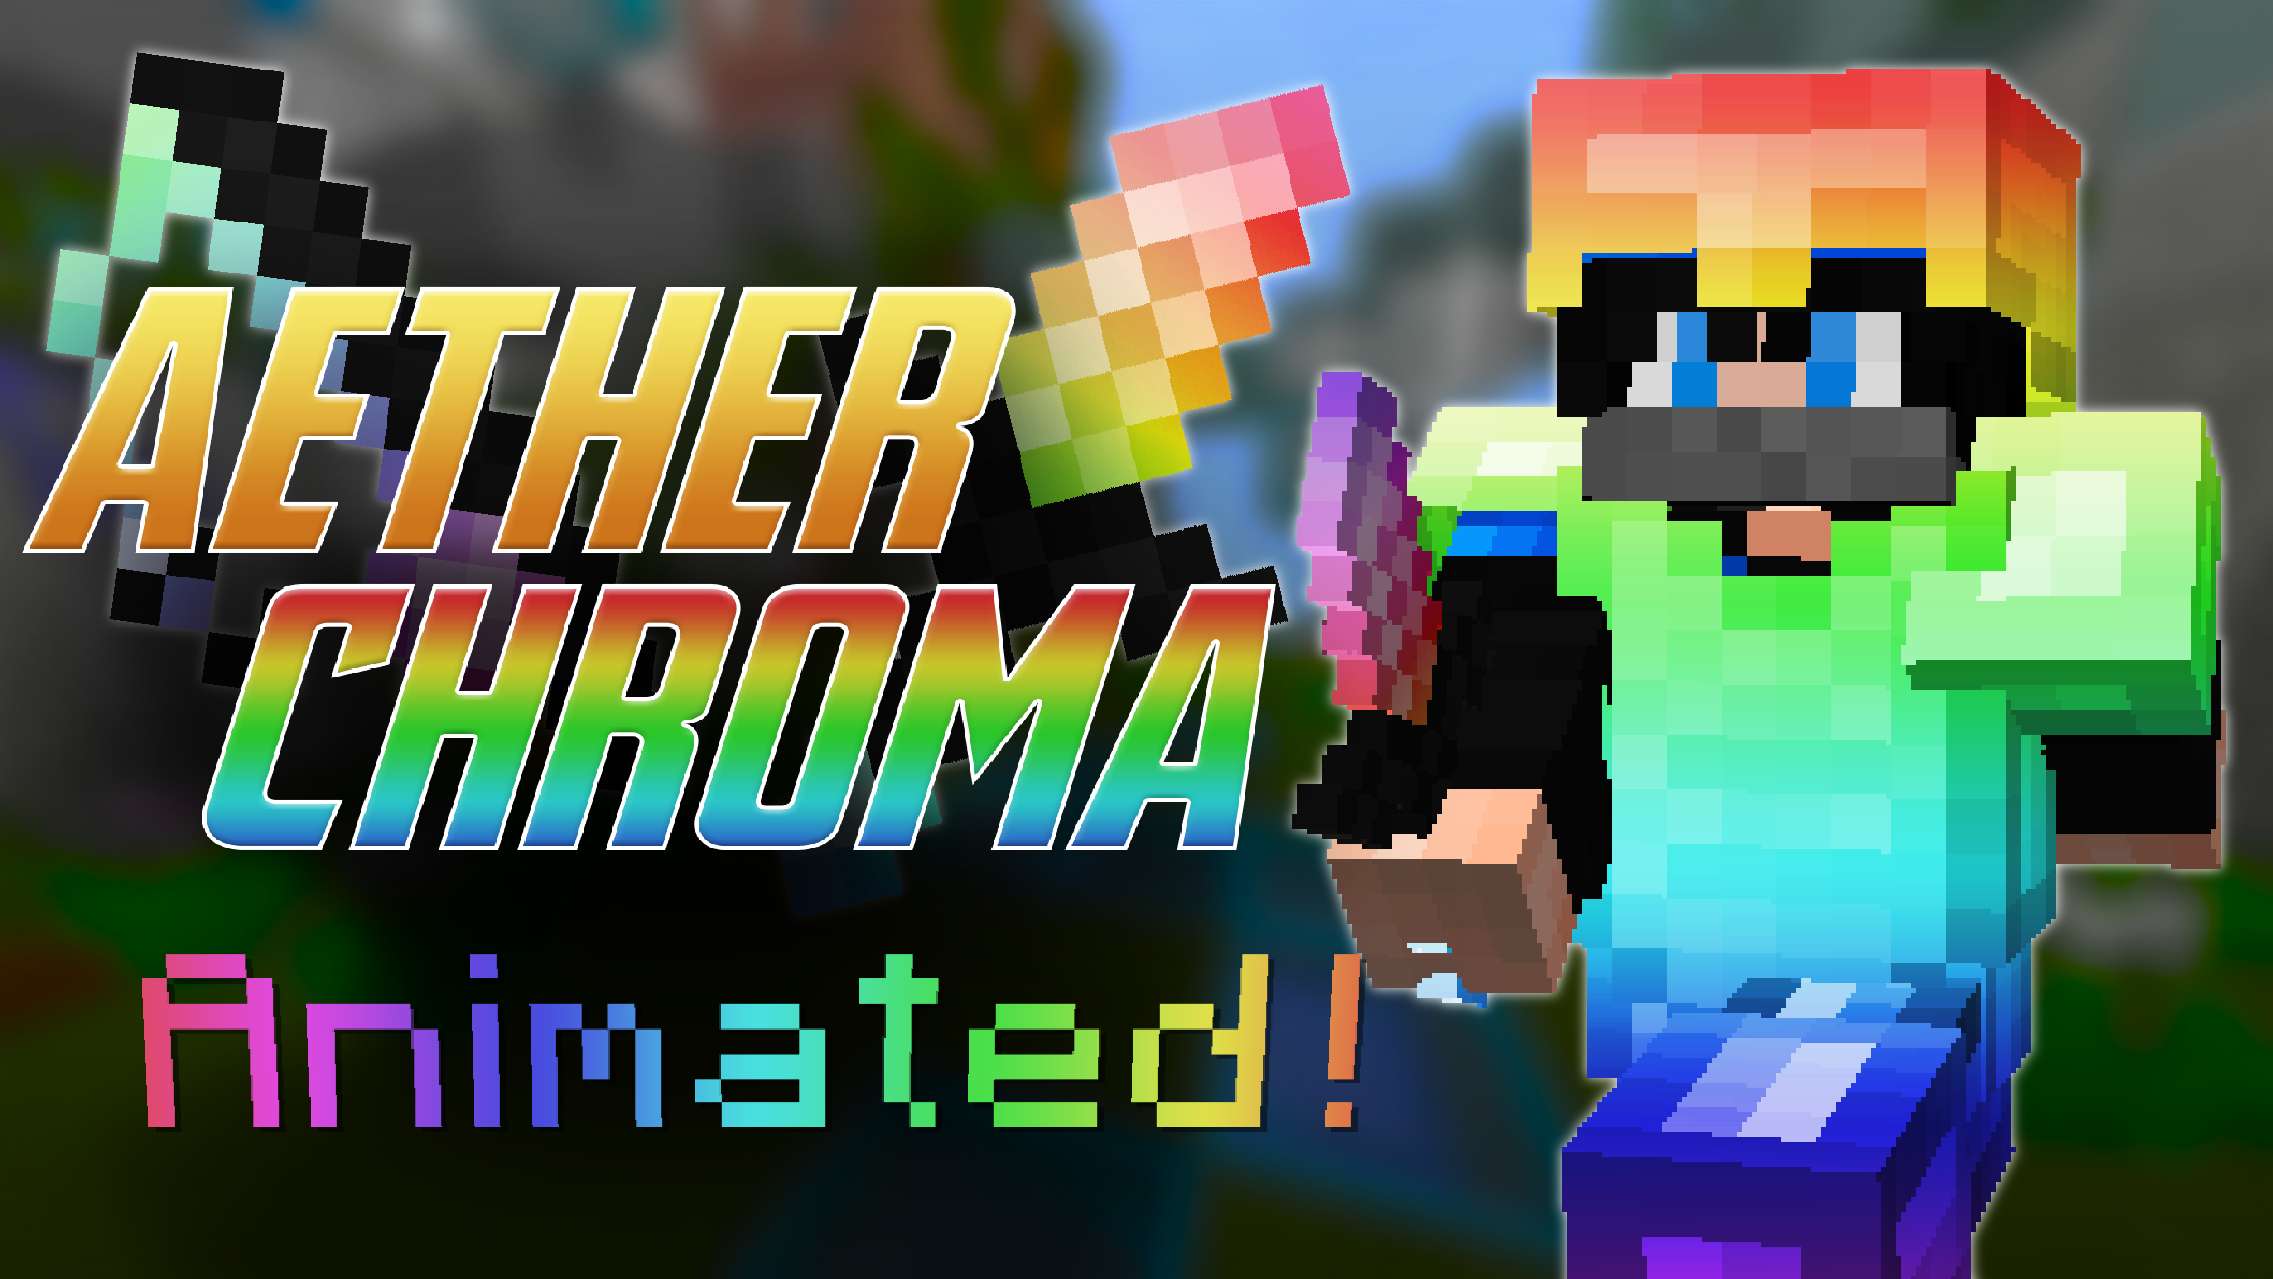 Aether Chroma 512x 512 by Mqryo on PvPRP